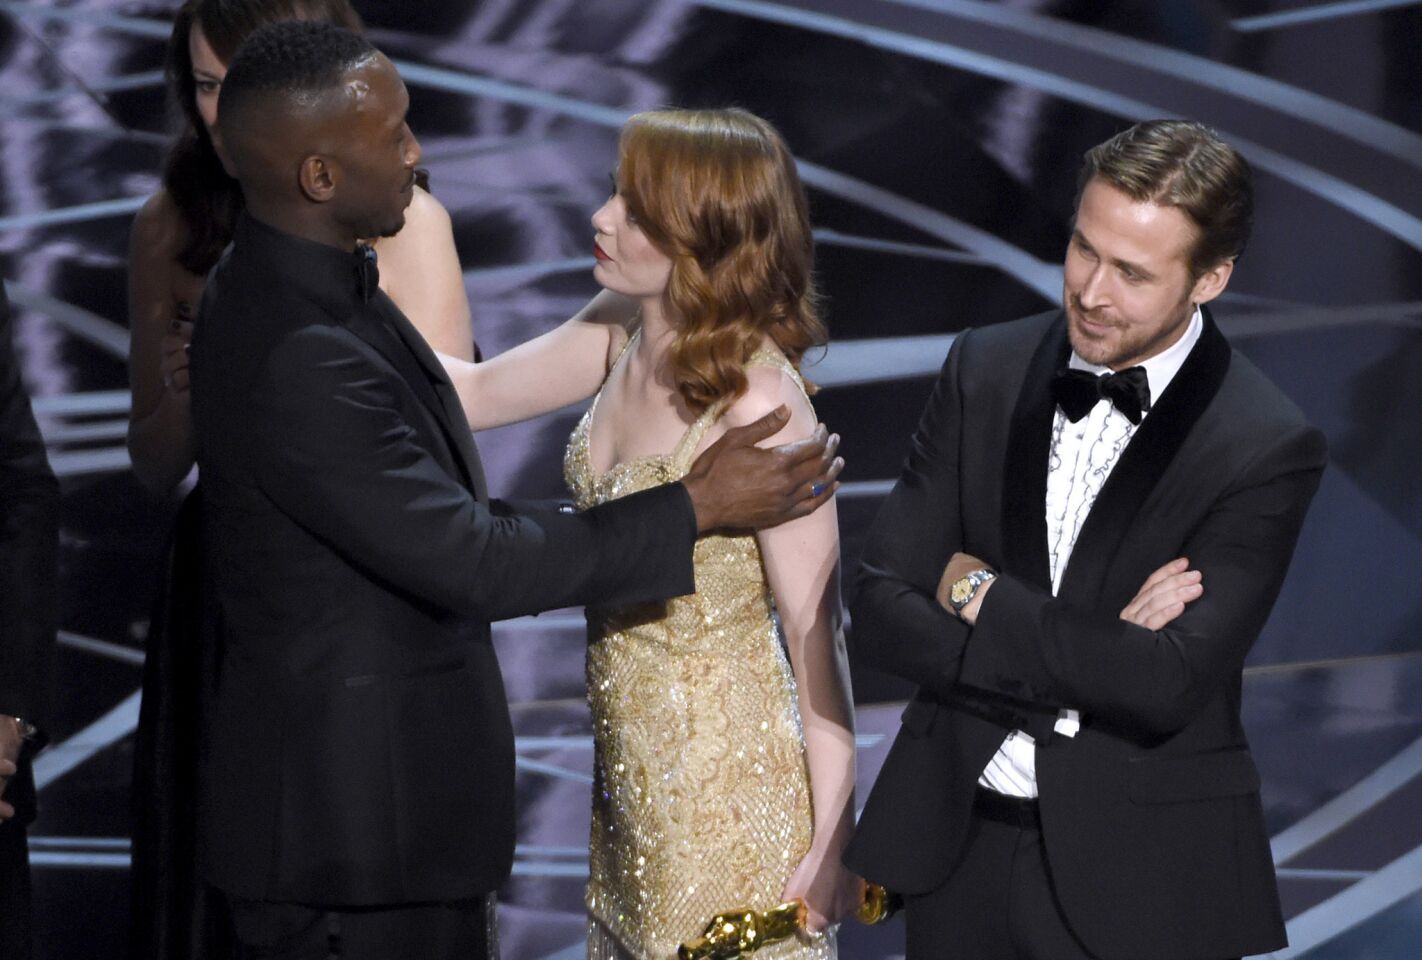 Ryan Gosling, right, stands with arms folded as Emma Stone congratulates Mahershala Ali of "Moonlight."